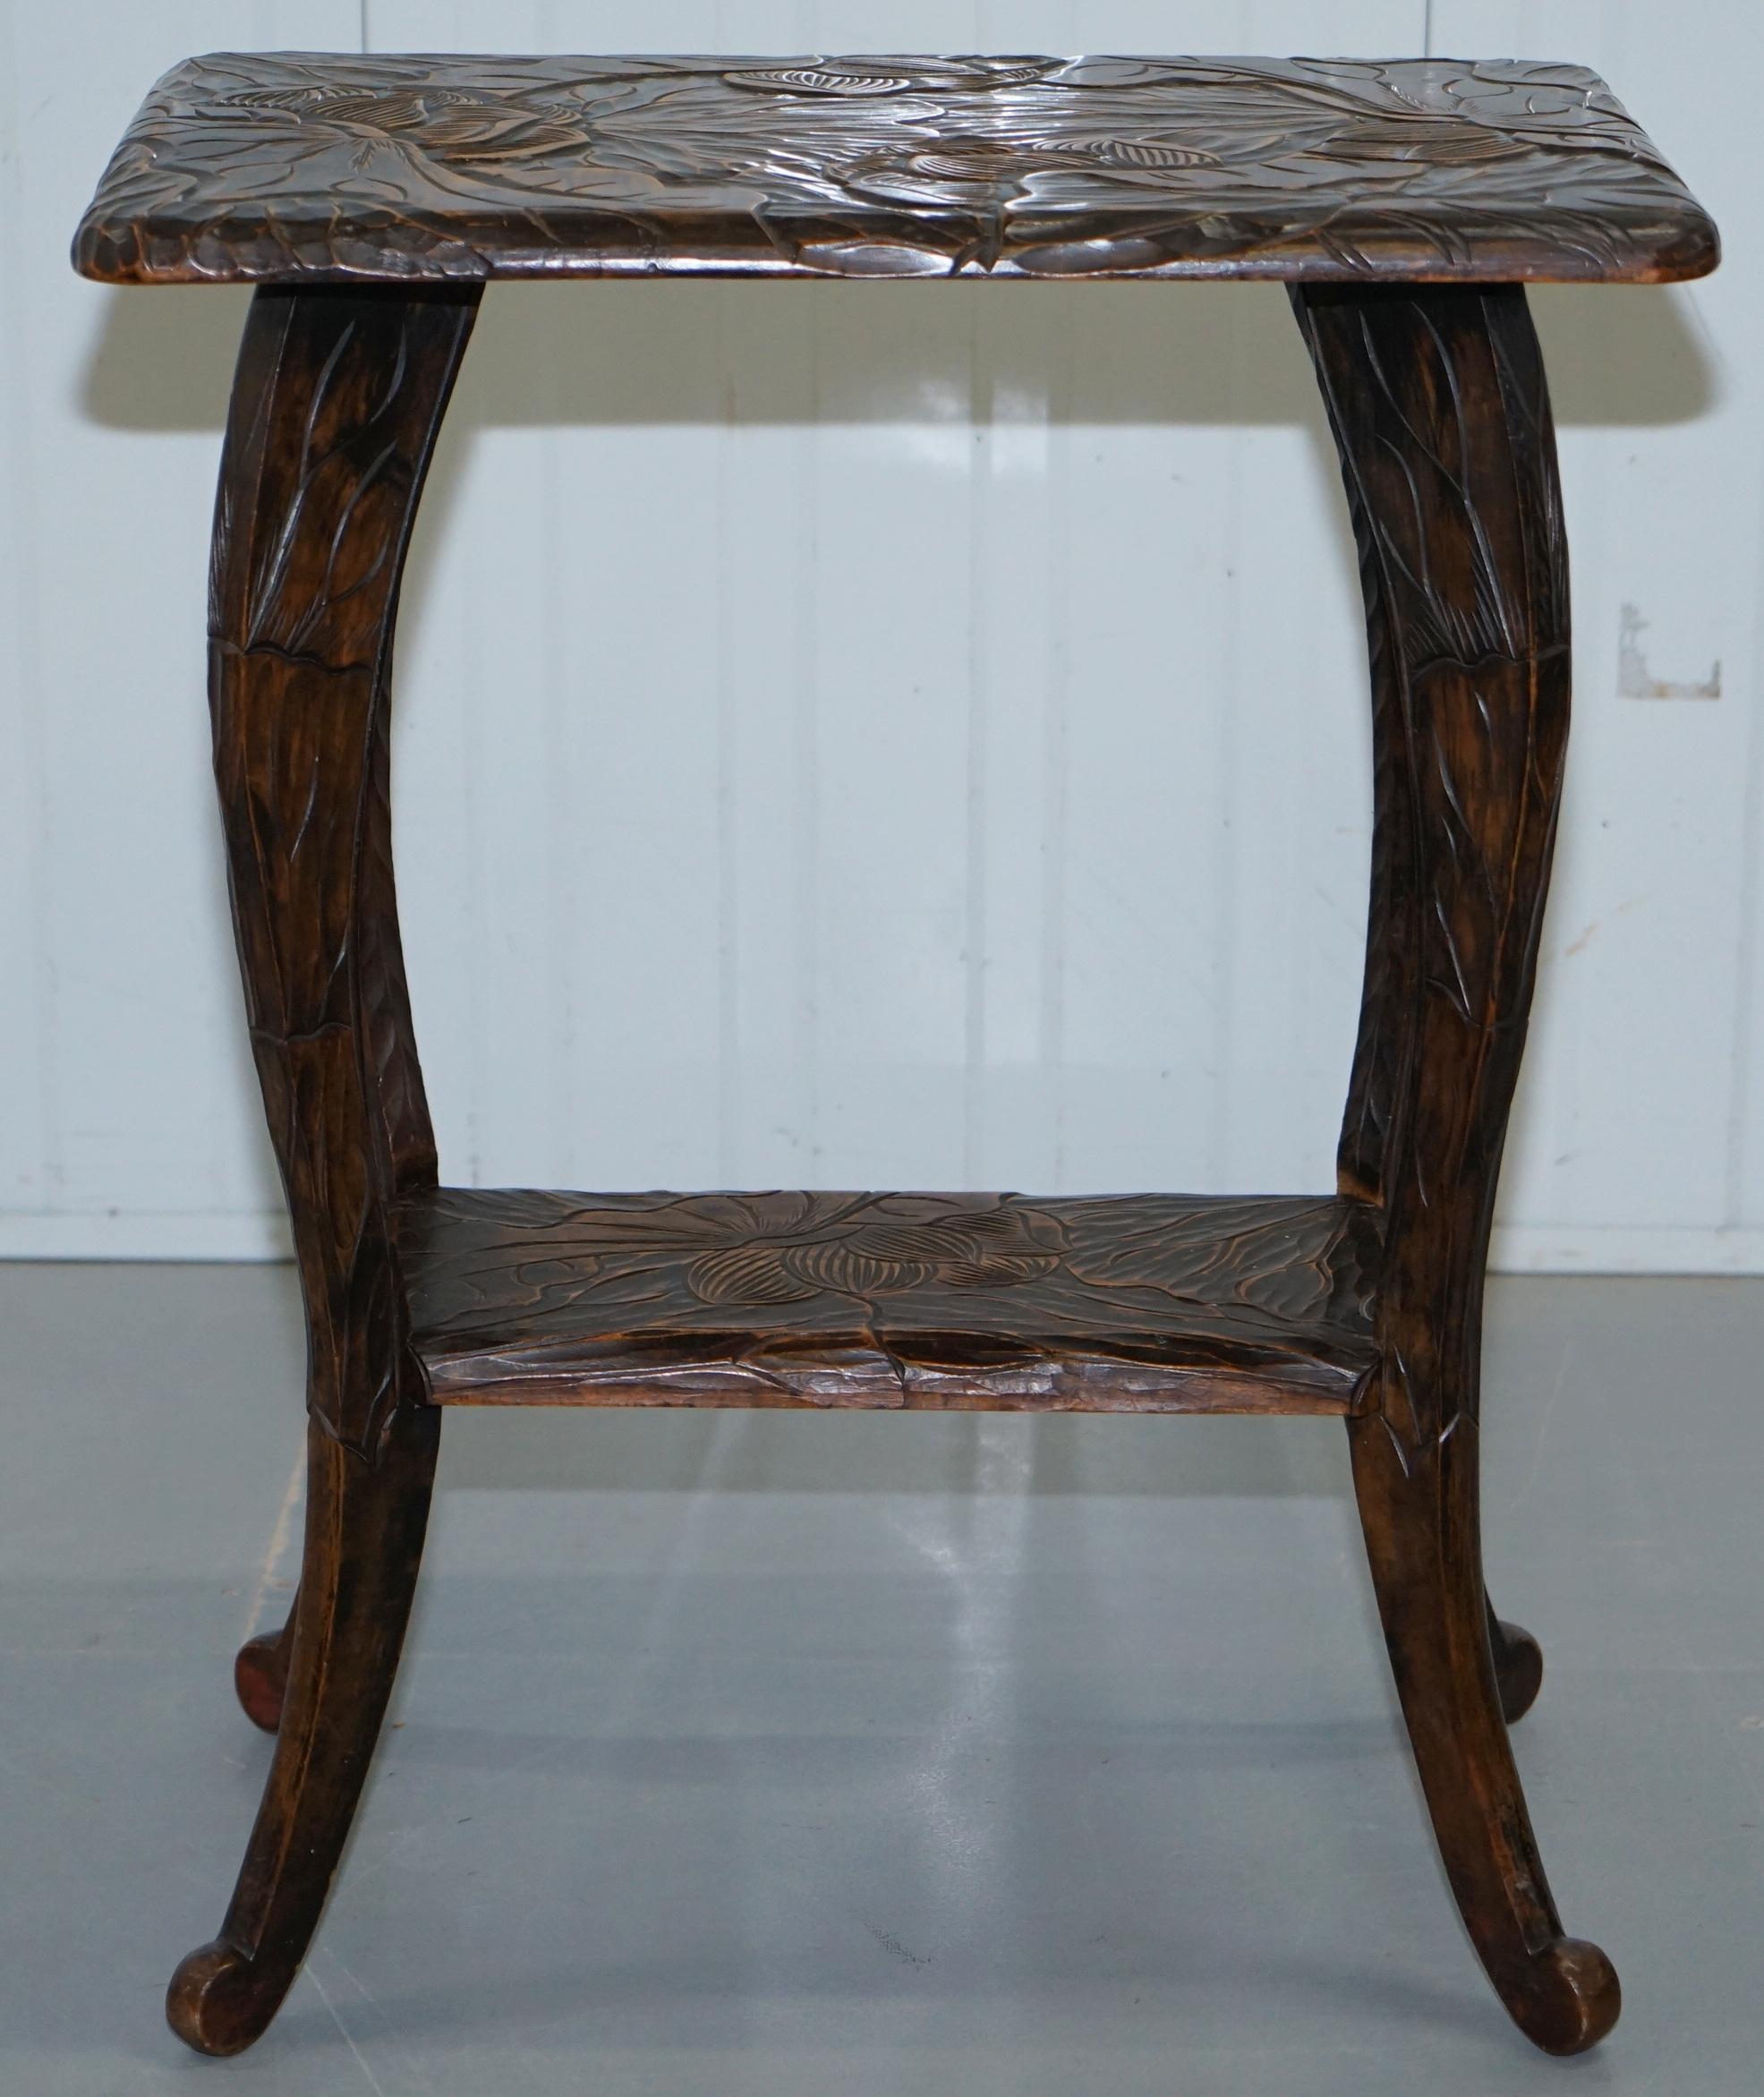 1905 Liberty London Made in Japan Carved Table with Floral Detailing All-Over 5